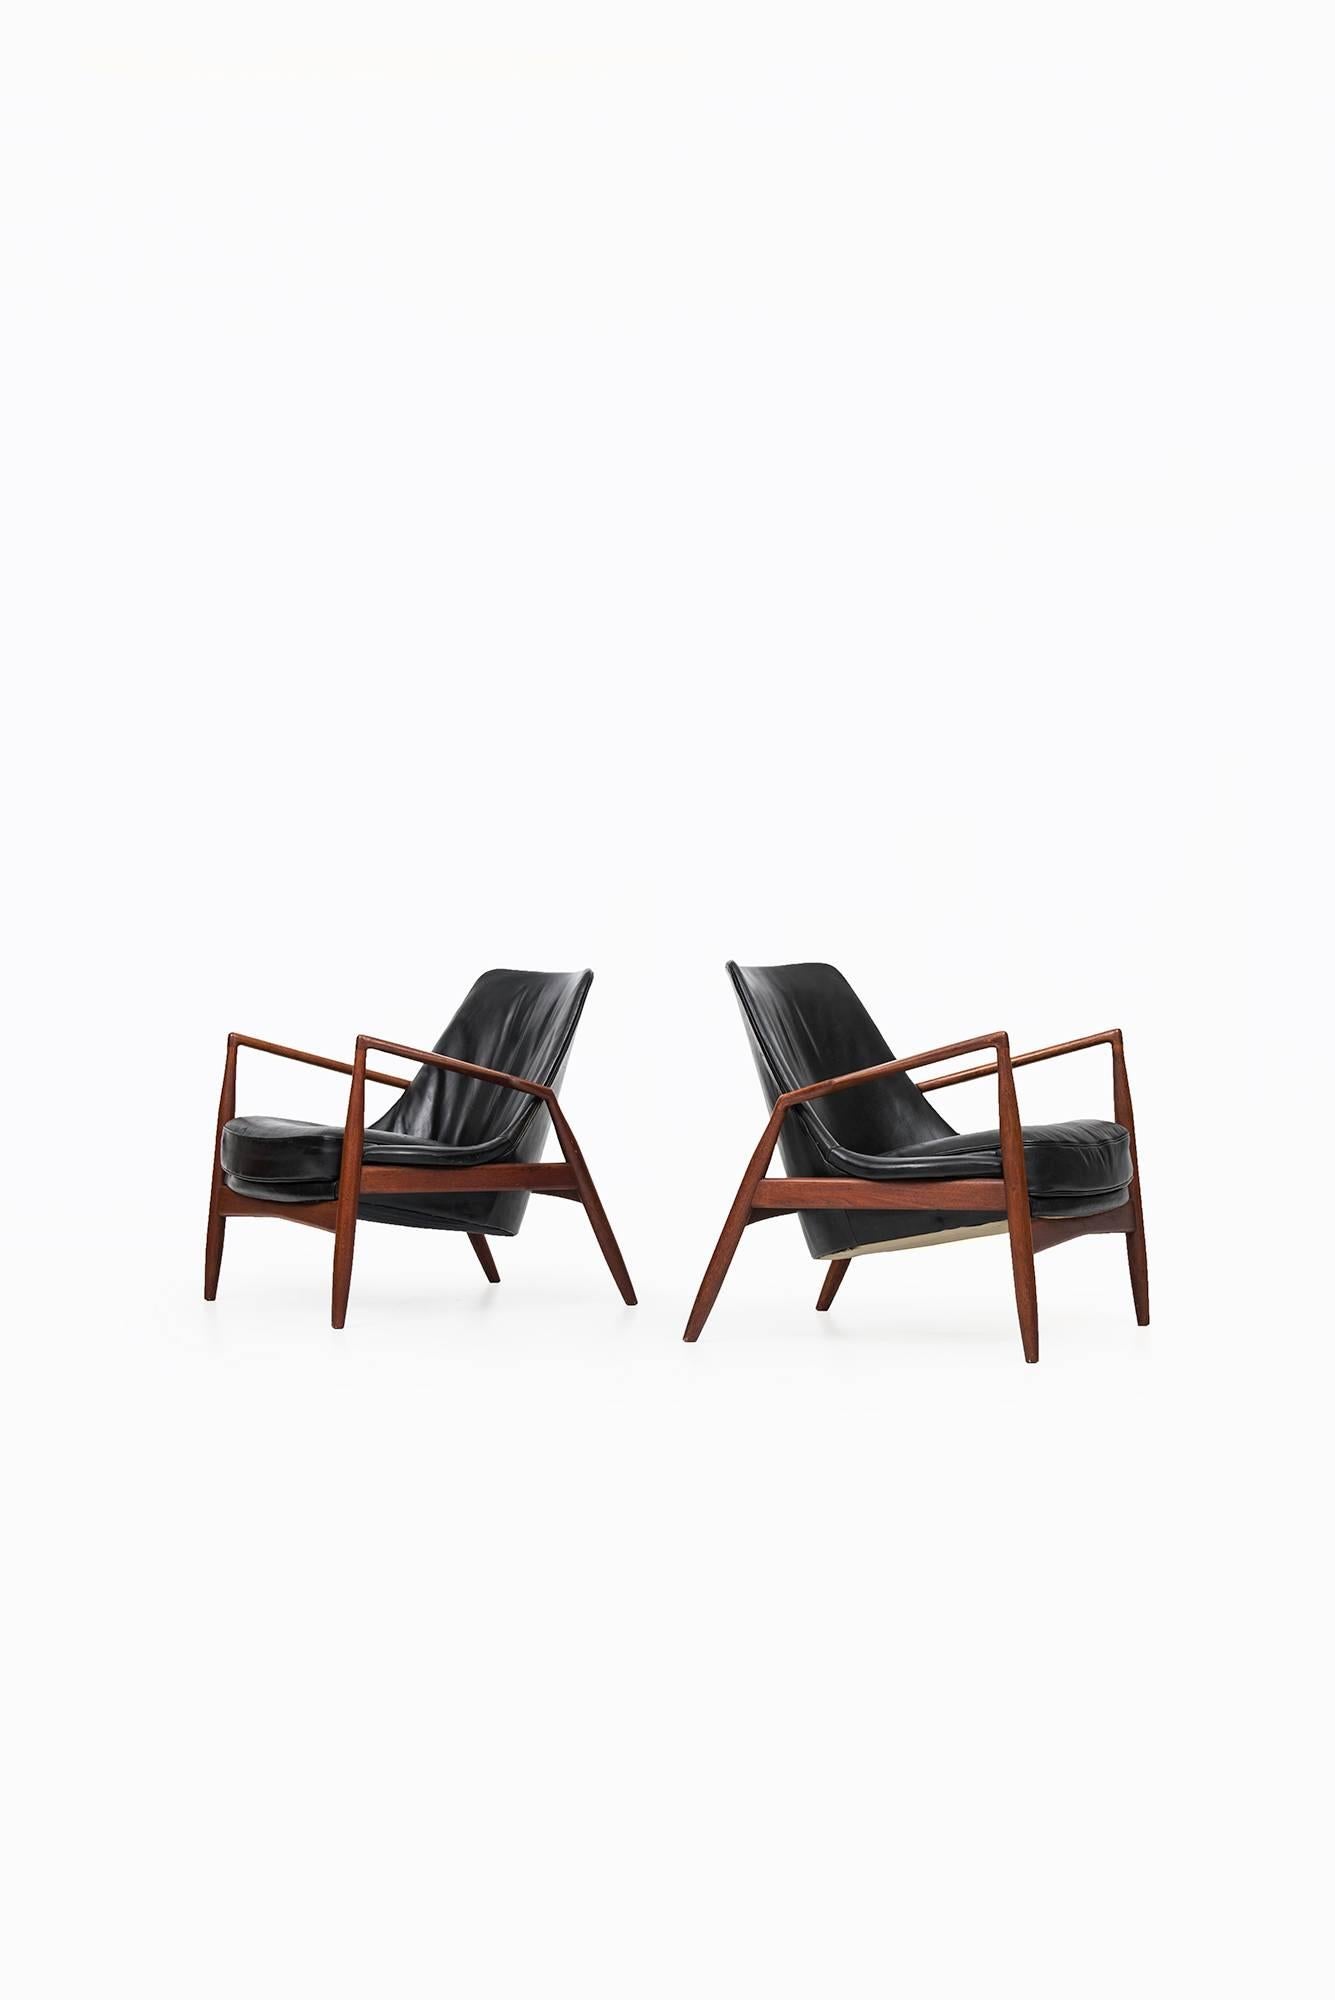 Rare pair of easy chairs model Sälen / Seal designed by Ib Kofod-Larsen. Produced by OPE in Sweden.